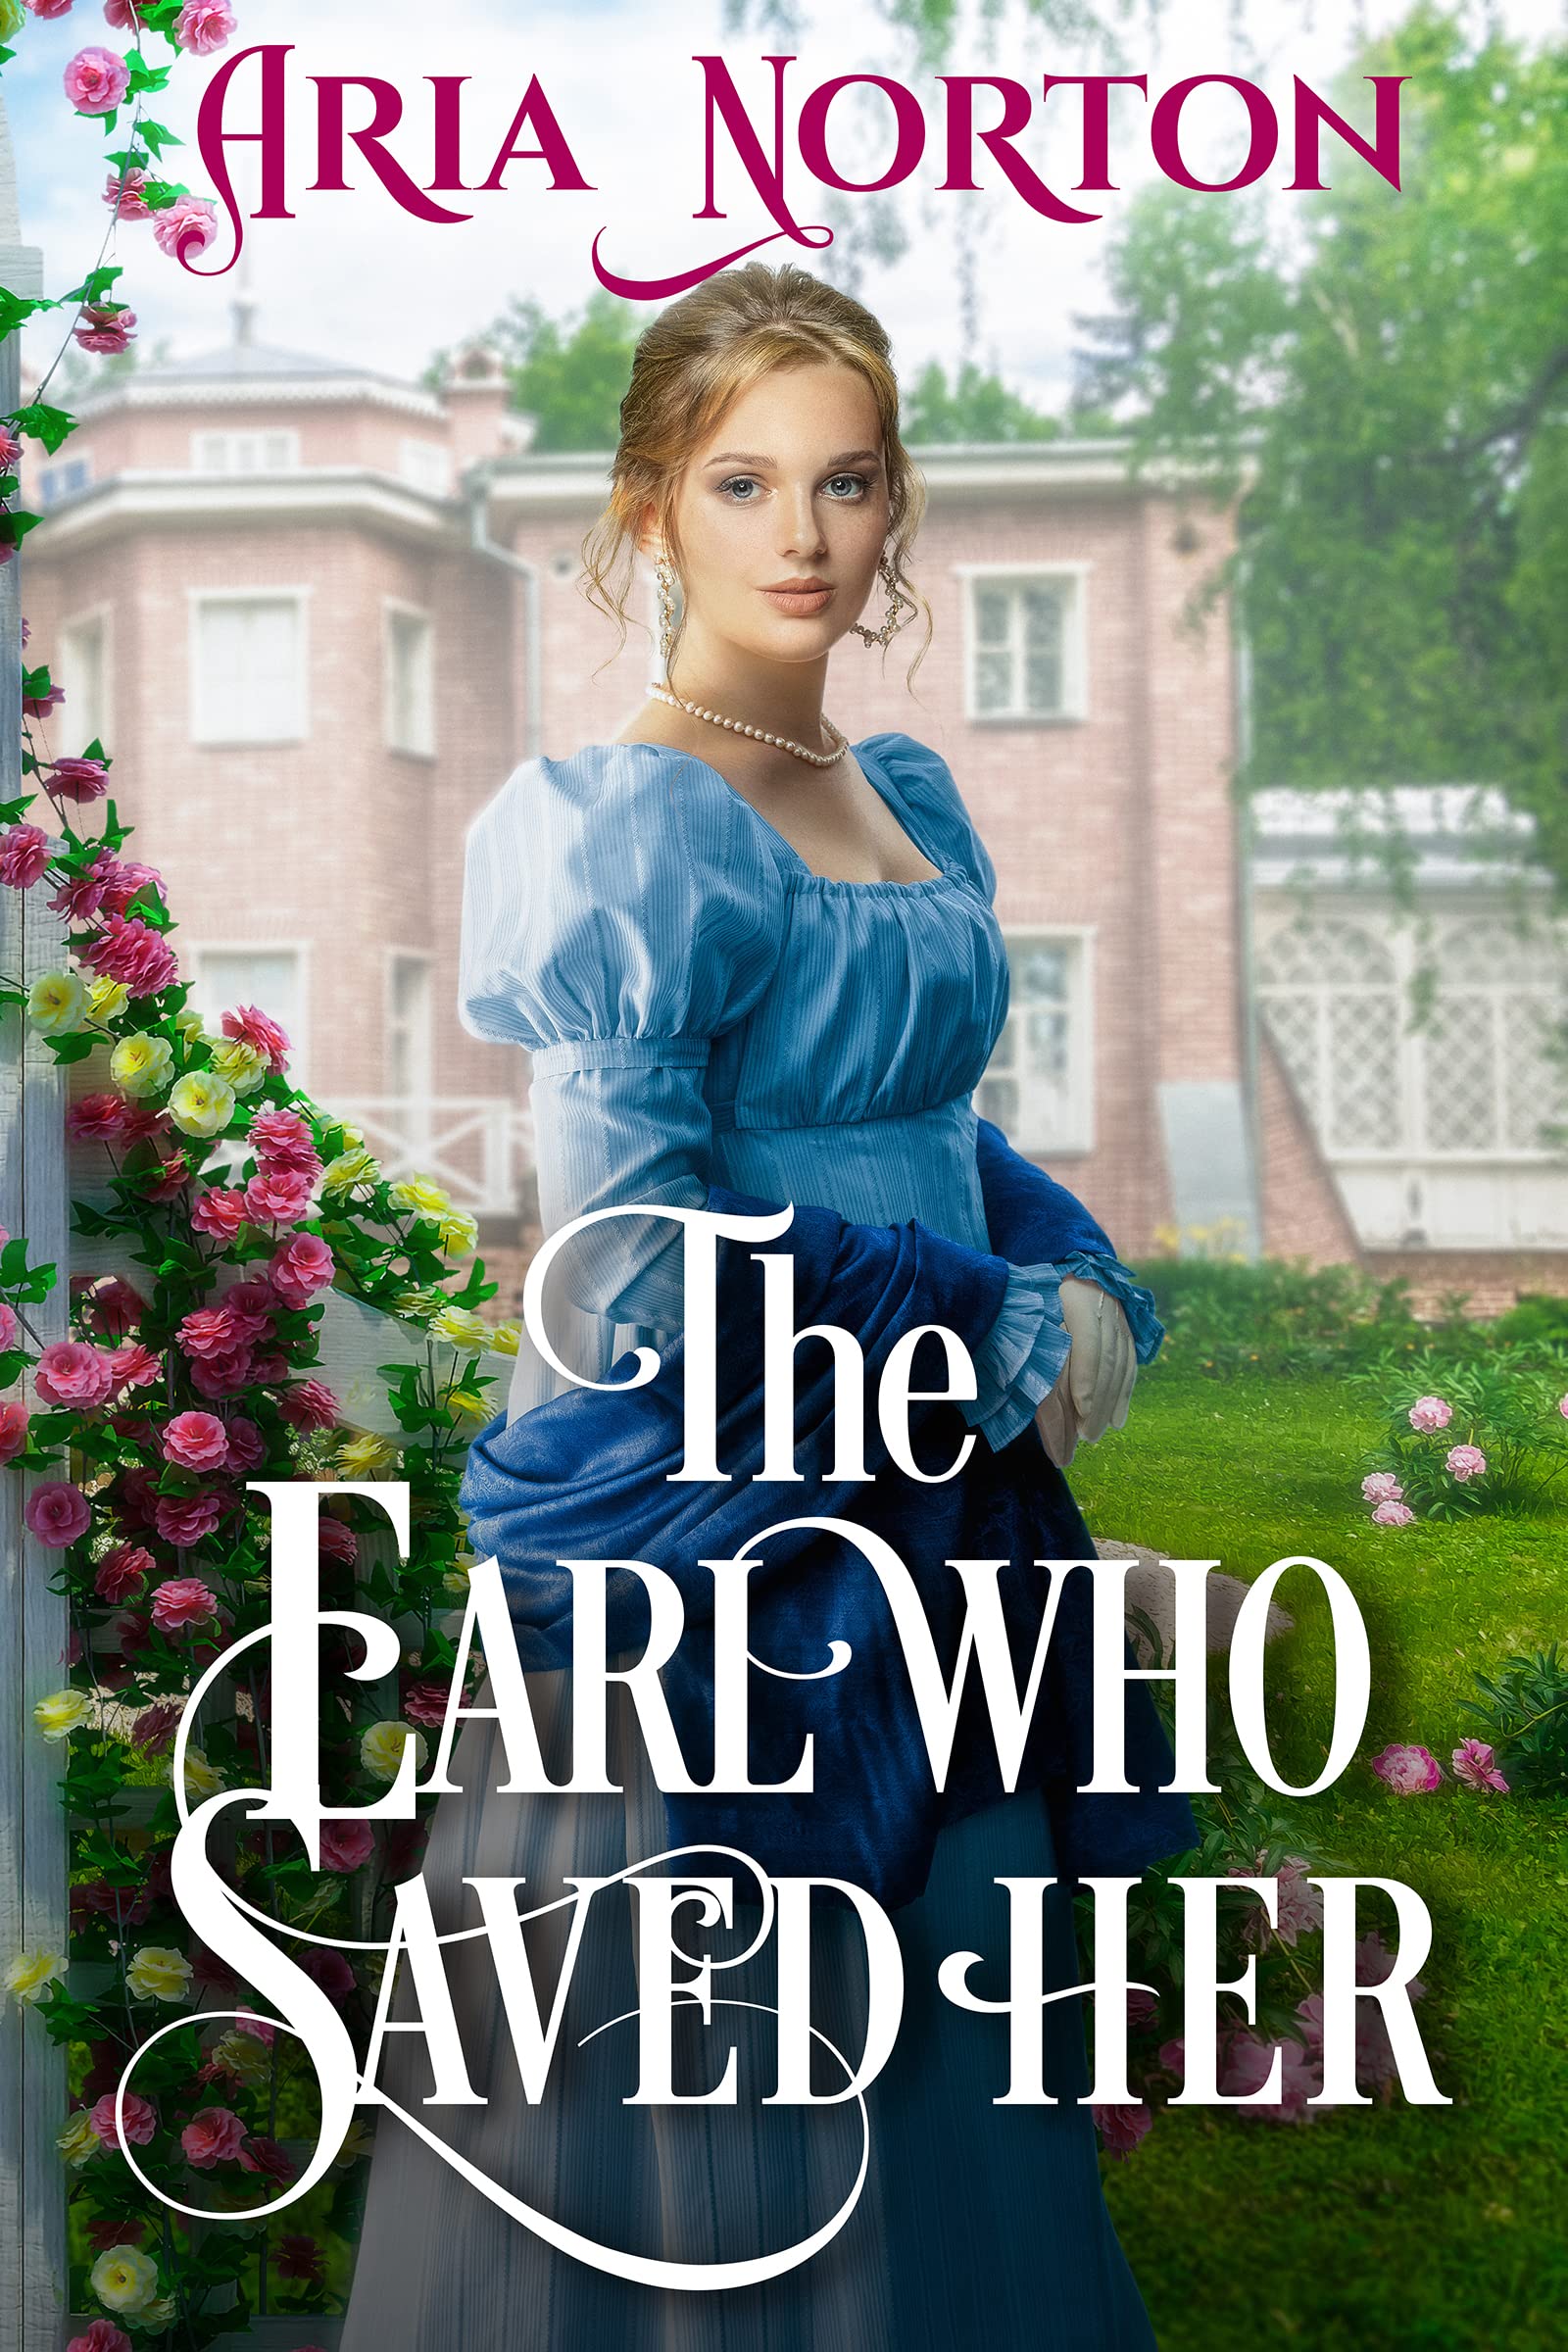 The Earl who Saved her_ A Histo - Aria Norton